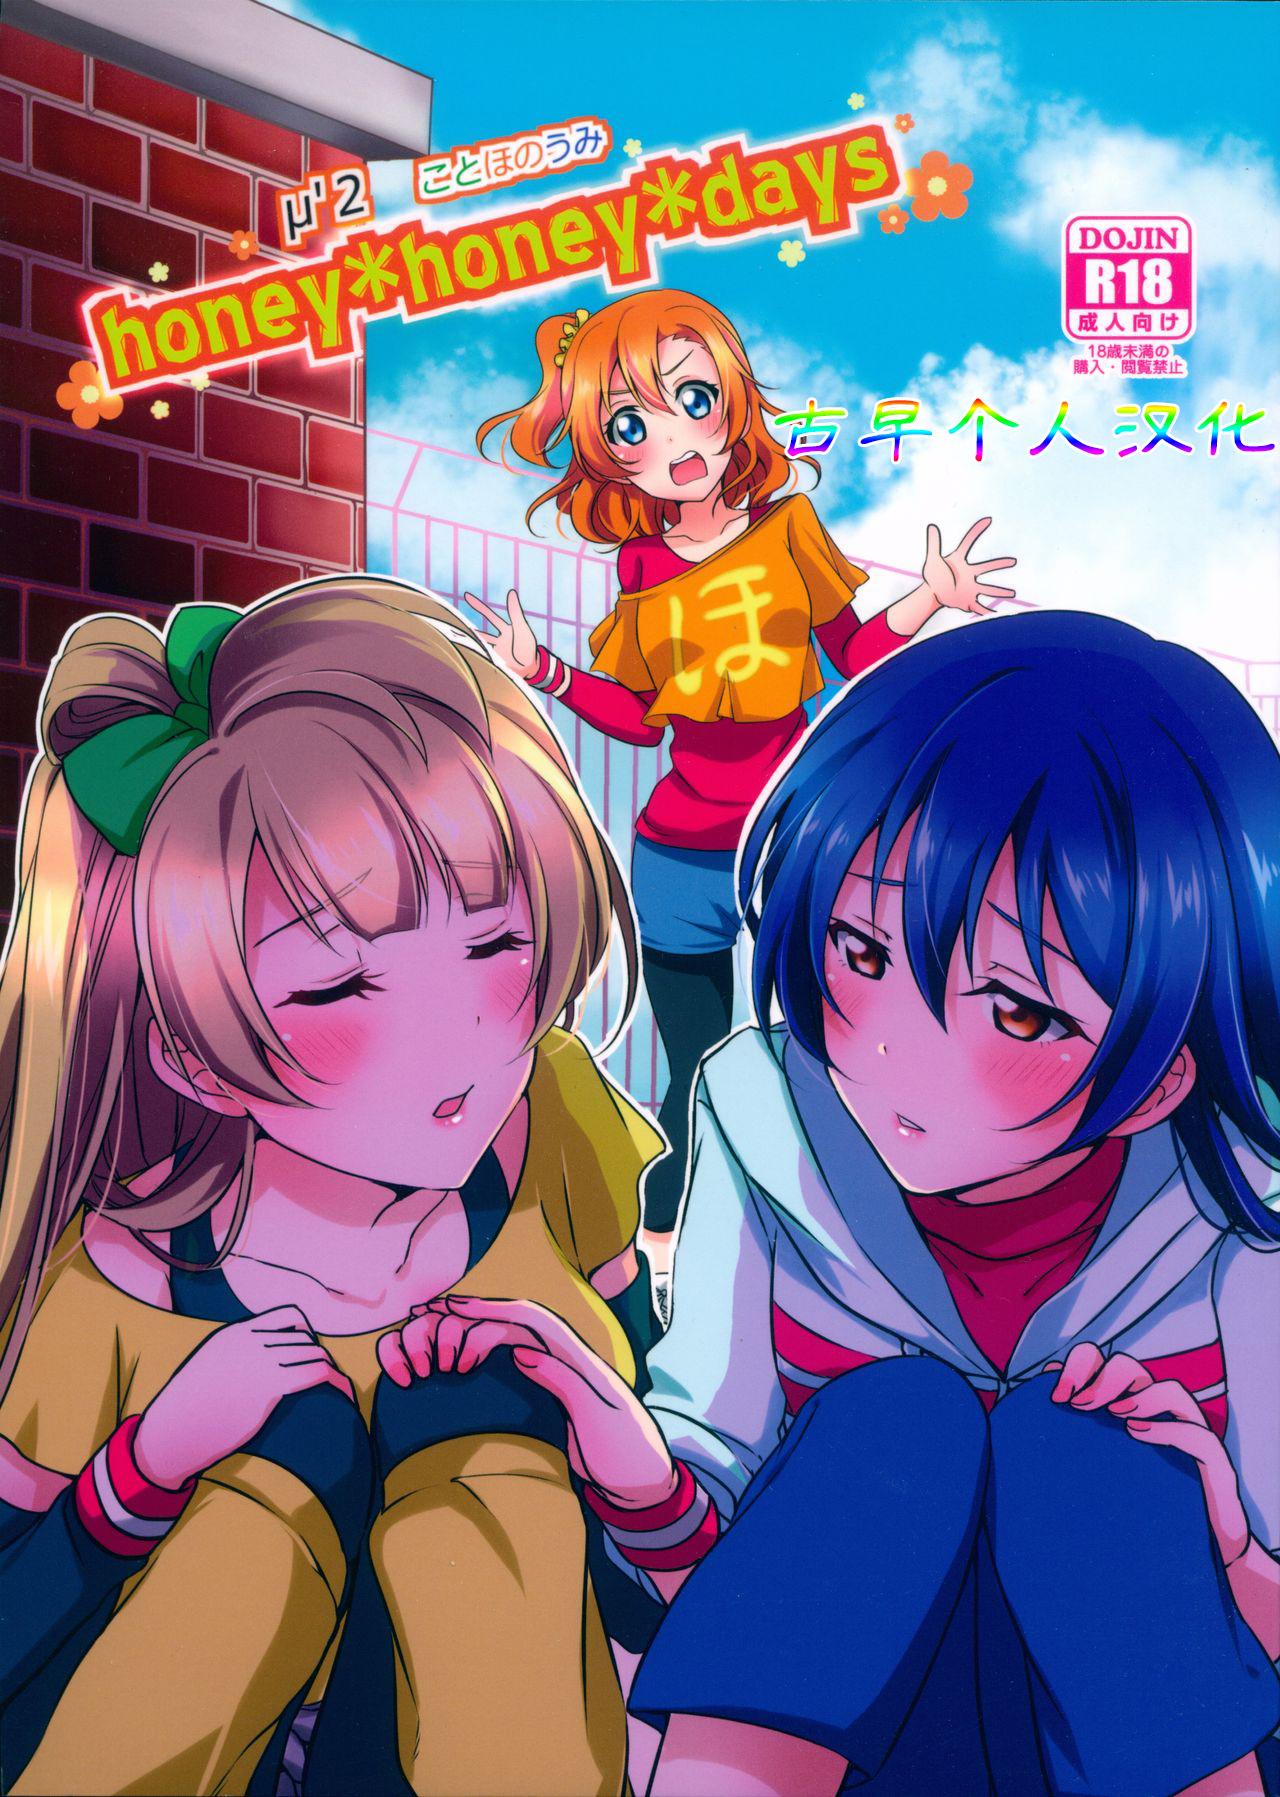 Bucetinha honey*honey*days - Love live Red - Picture 1